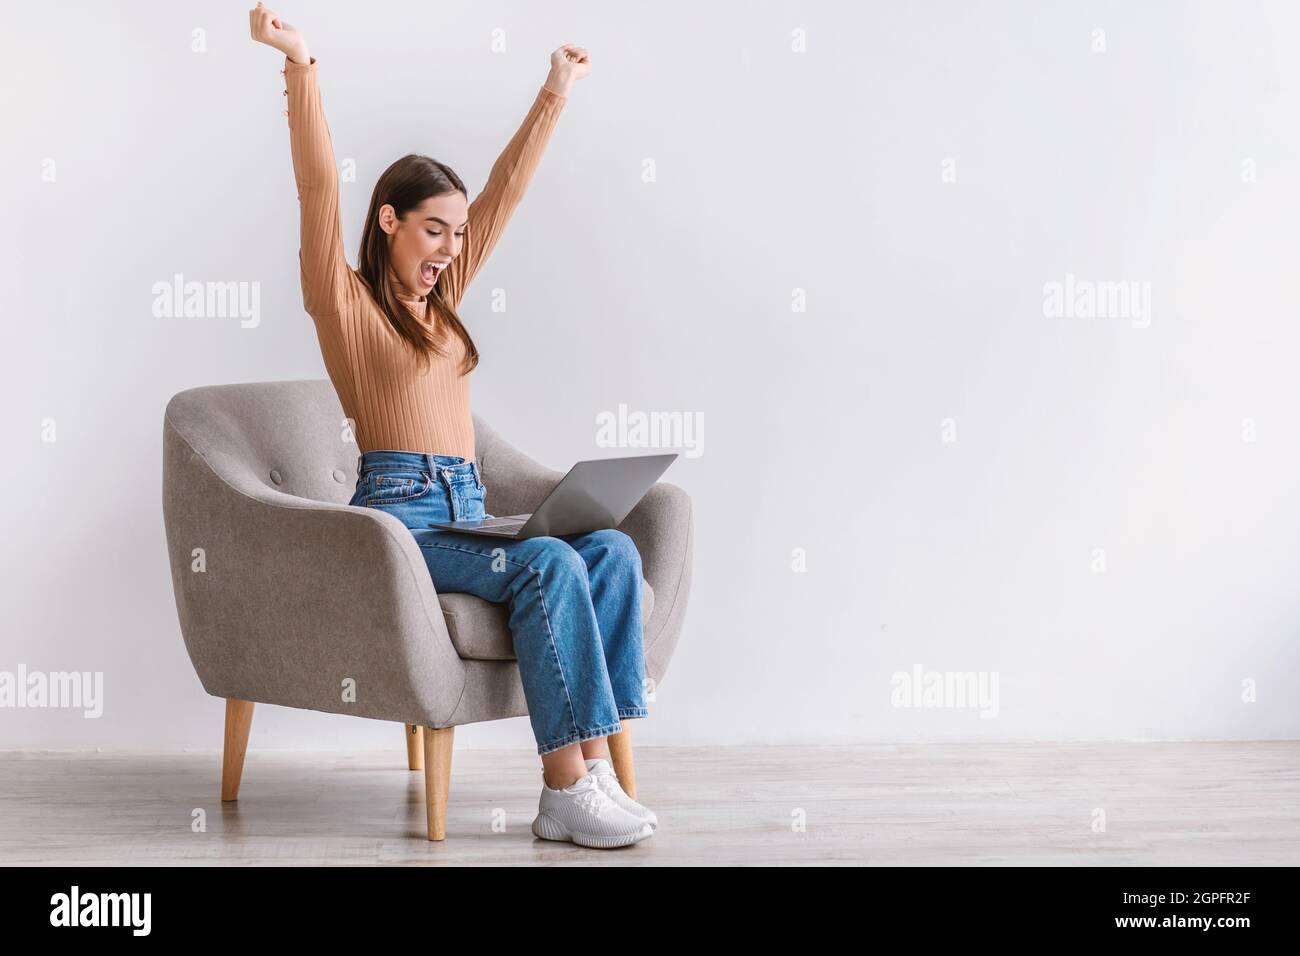 Excited young Caucasian lady sitting in armchair with laptop, lifting hands up, celebrating success against white wall Stock Photo